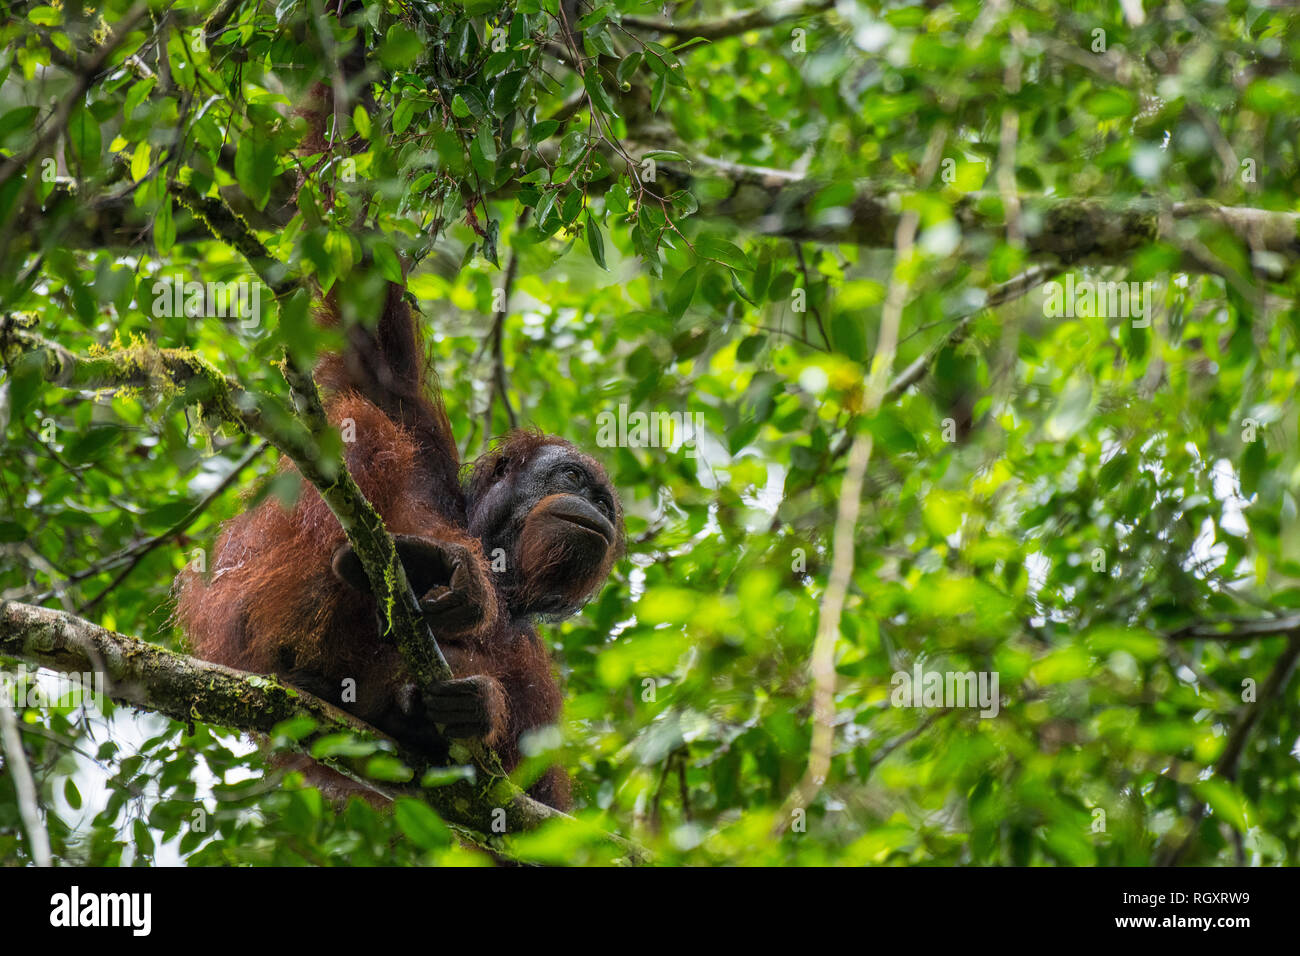 A female orangutan (named Kate, after Kate Middleton) in a tree in Danum Valley Rainforest, Sabah, Borneo, Malaysia. Stock Photo